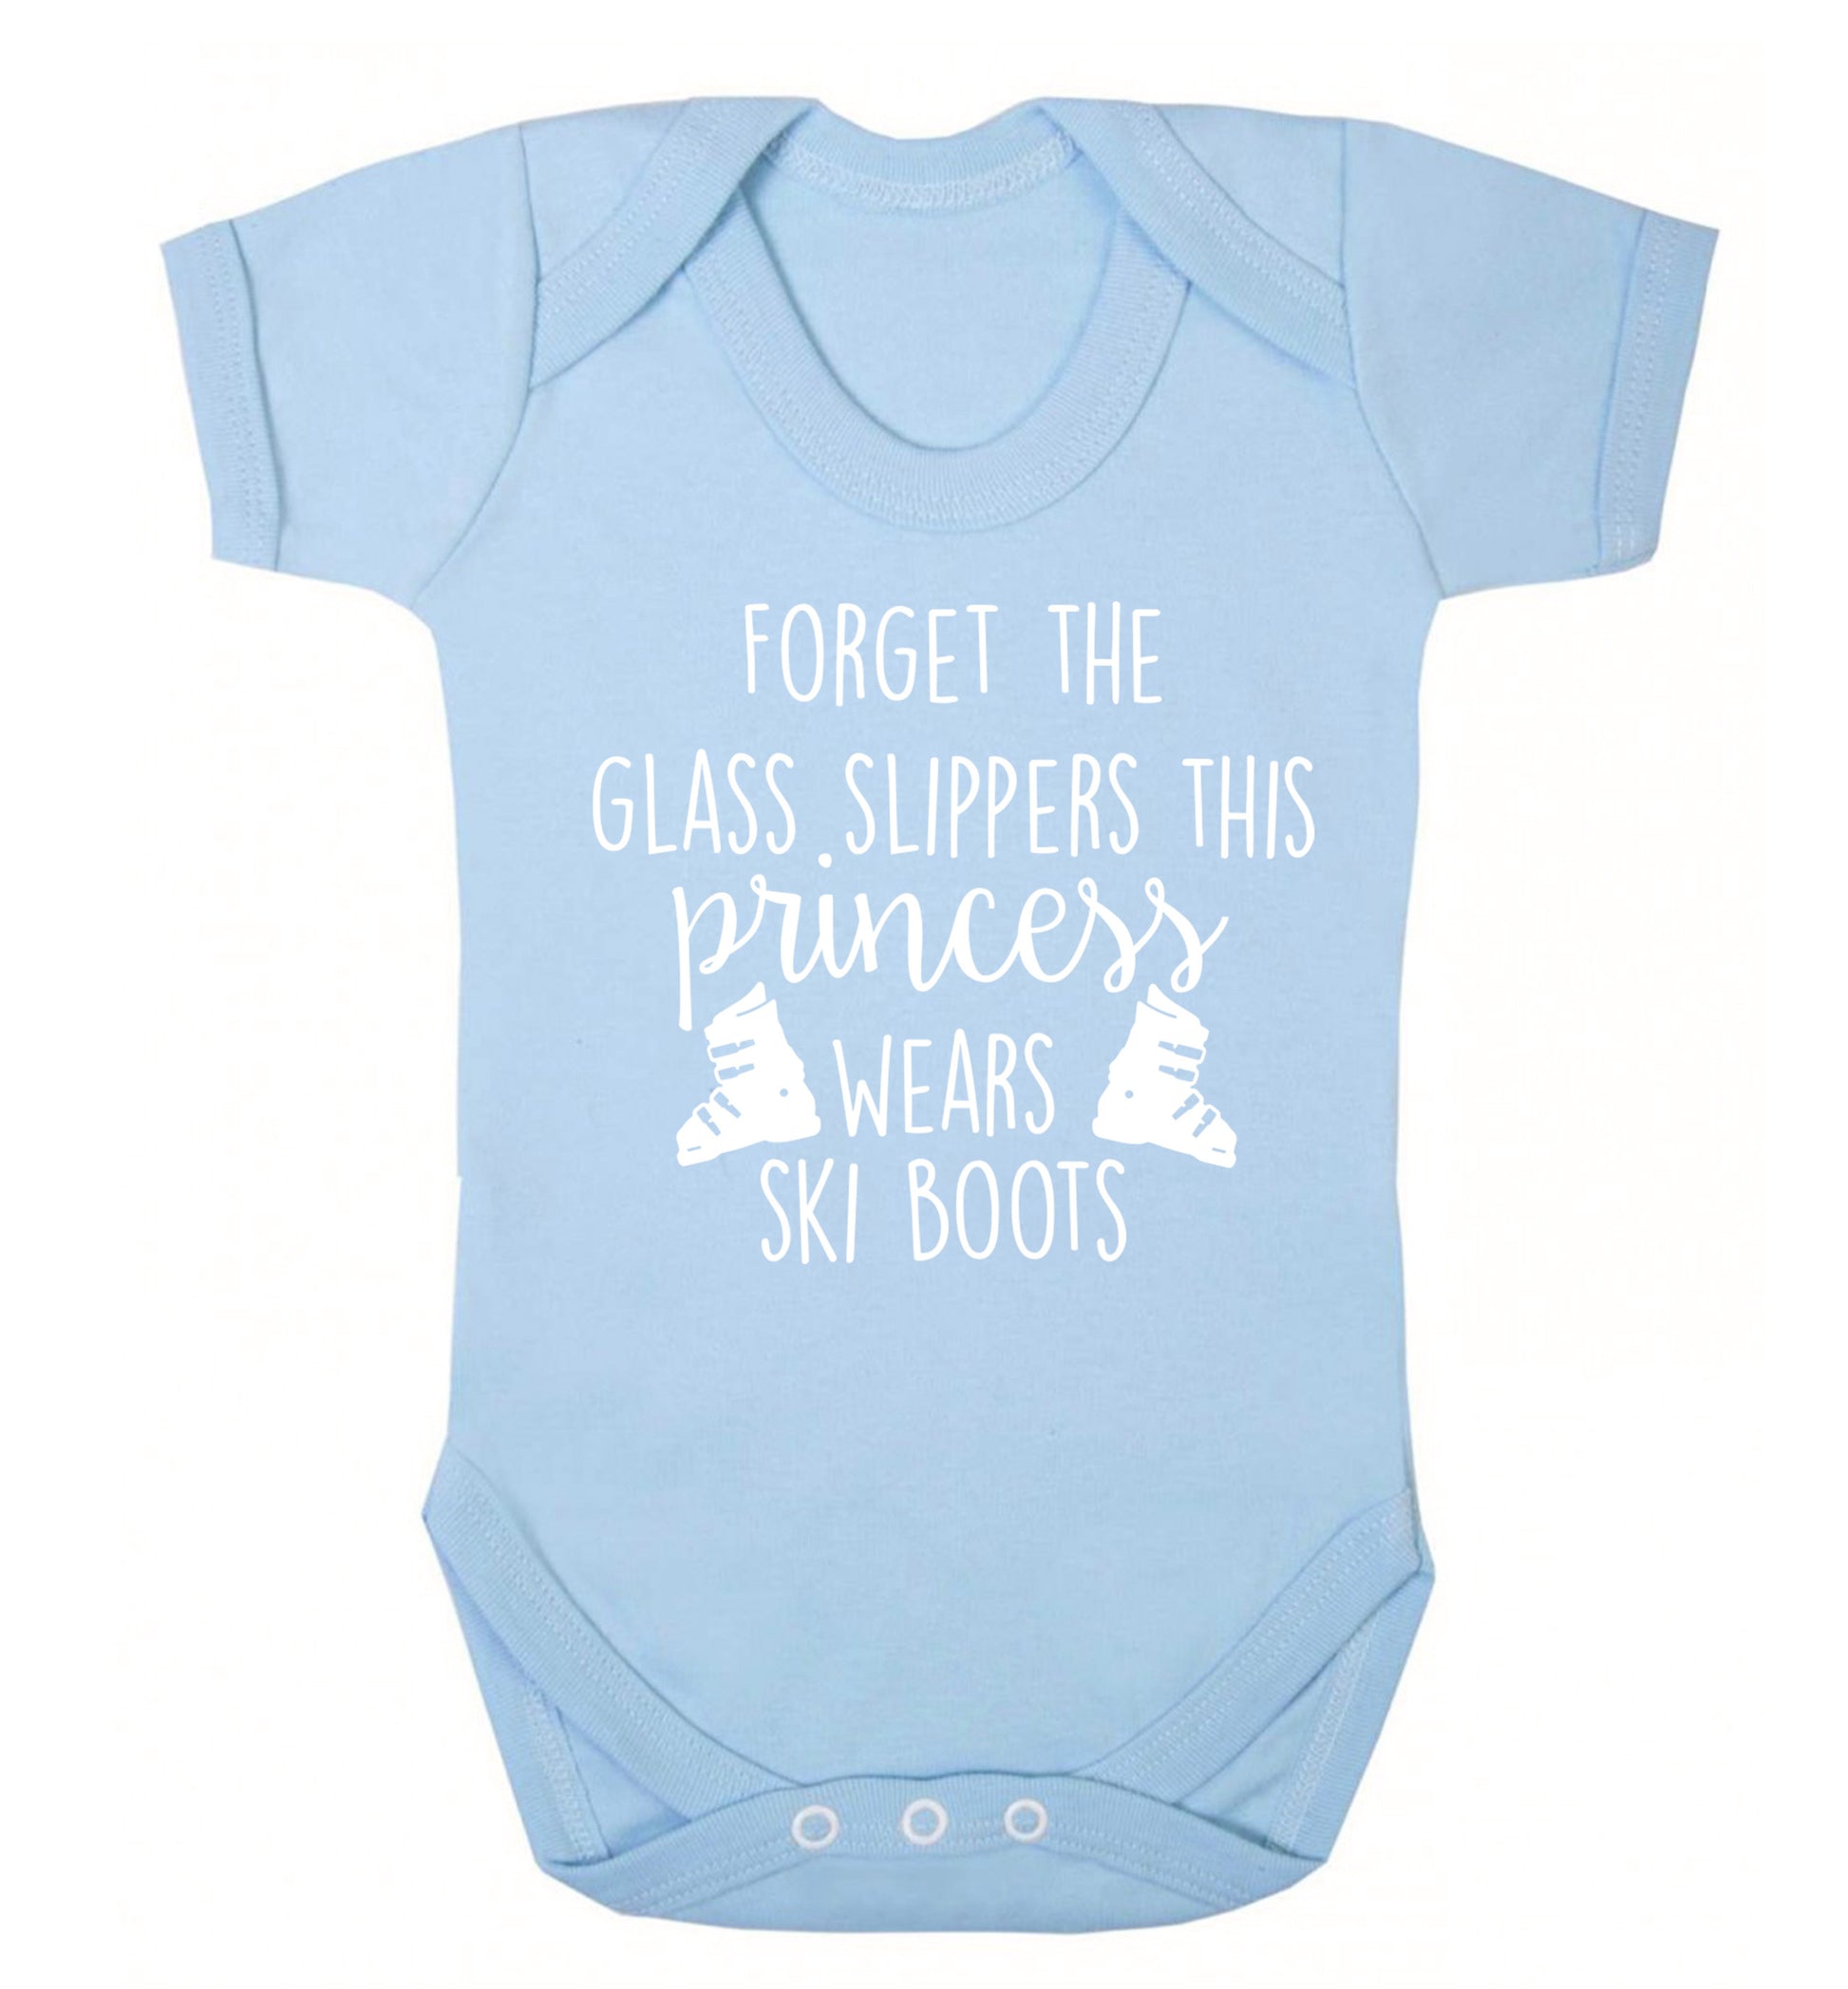 Forget the glass slippers this princess wears ski boots Baby Vest pale blue 18-24 months